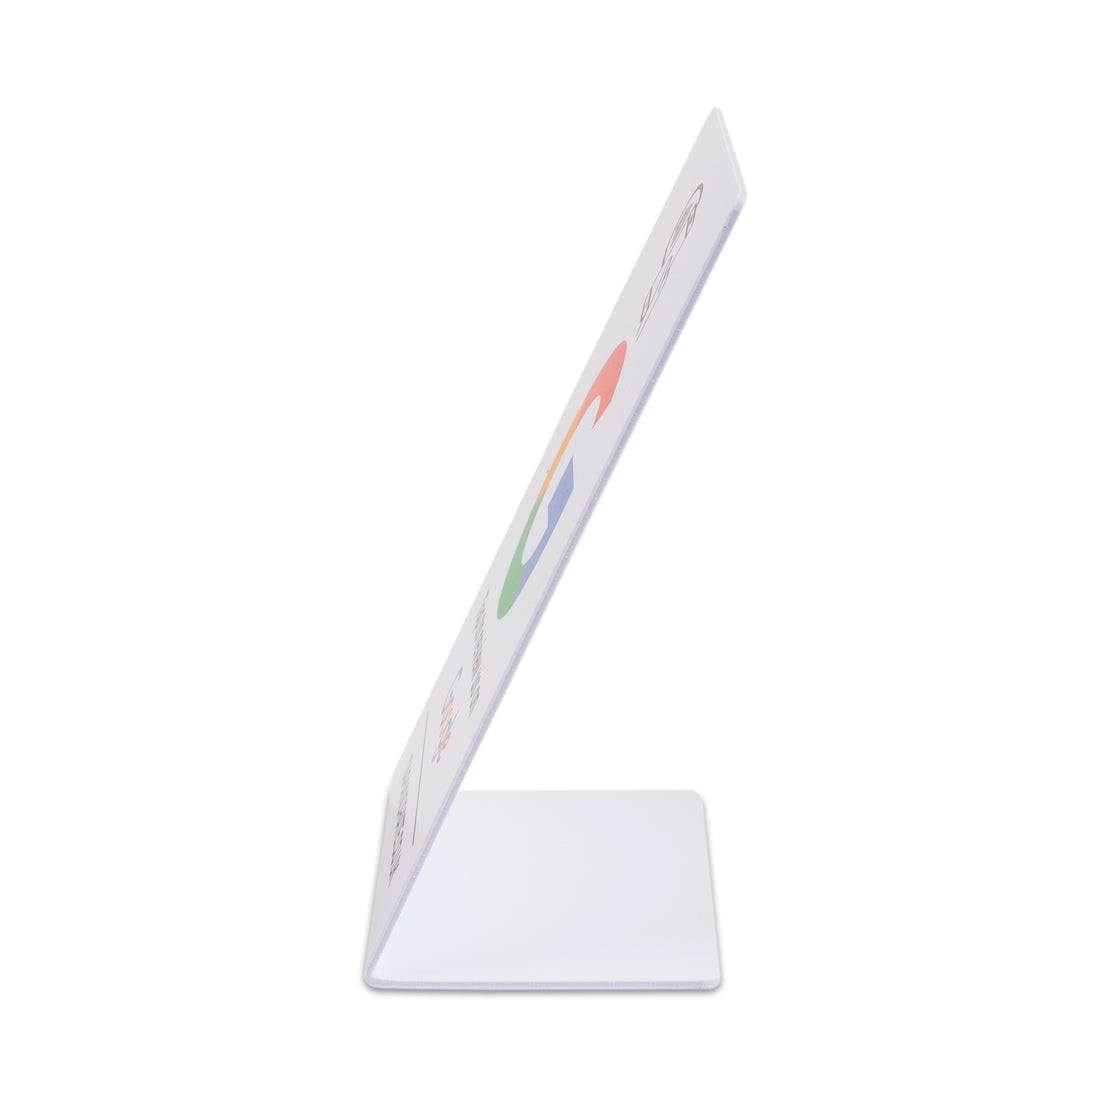 Smart Google Reviews Stand - White